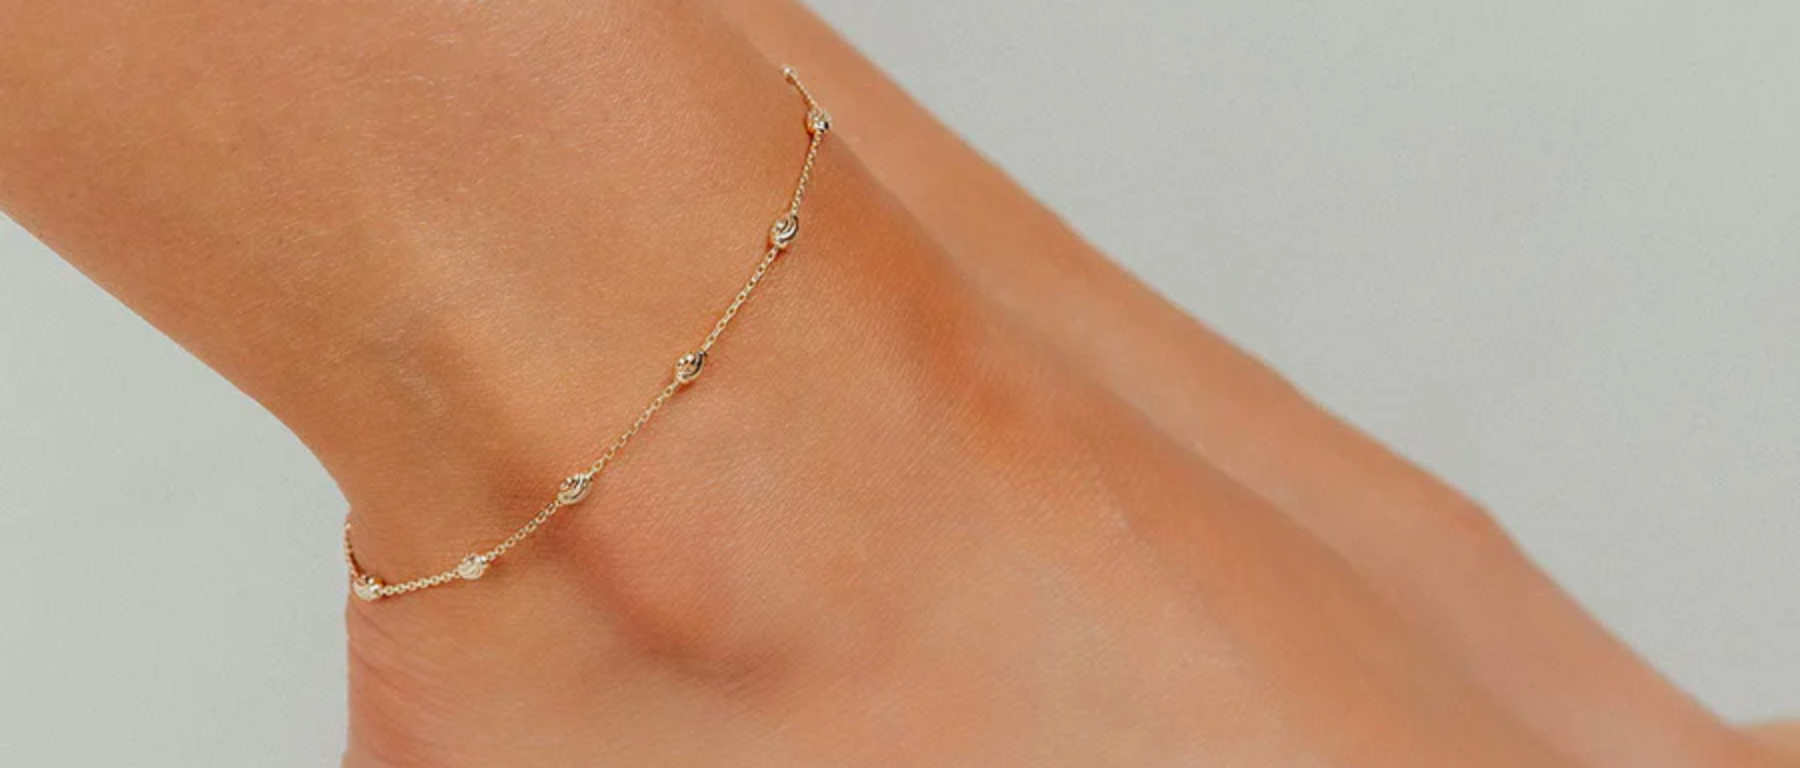 ADJUSTABLE MOON CUT STAZIONE BEAD ANKLET (GOLD)